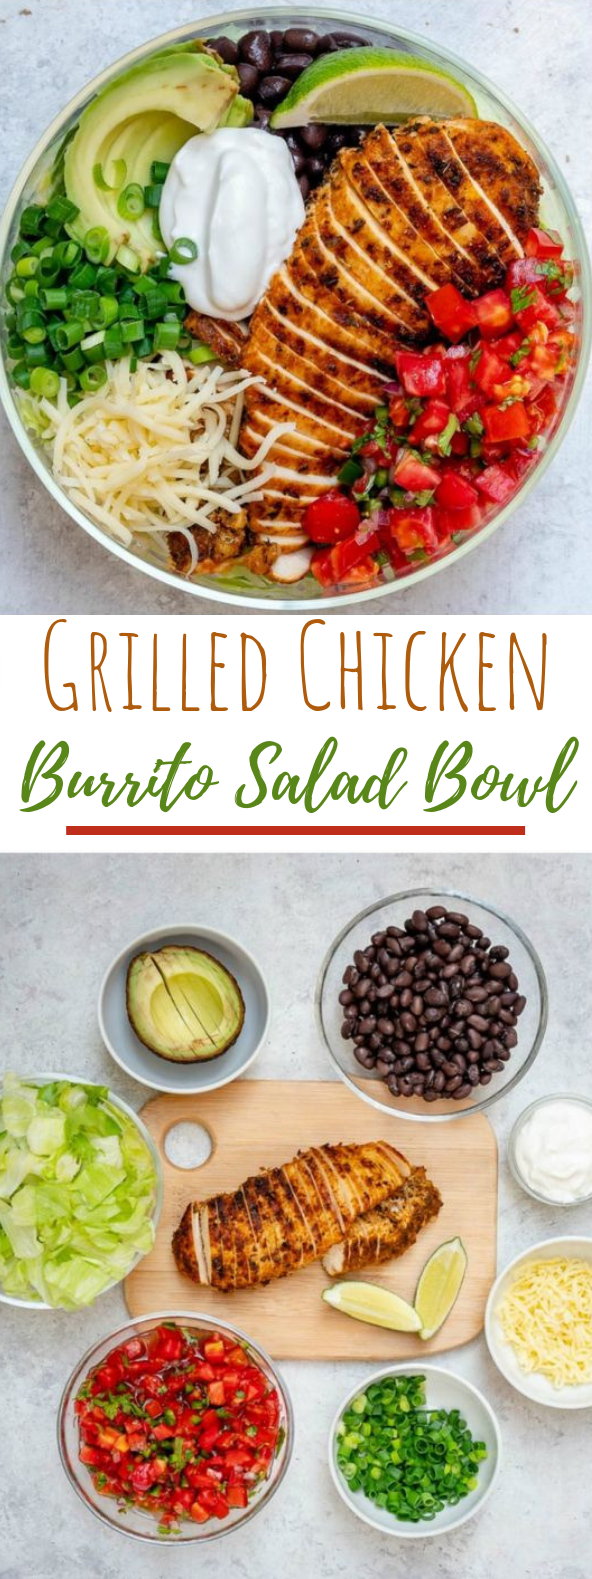 Grilled Chicken Burrito Salad Bowls #healthy #cleaneating